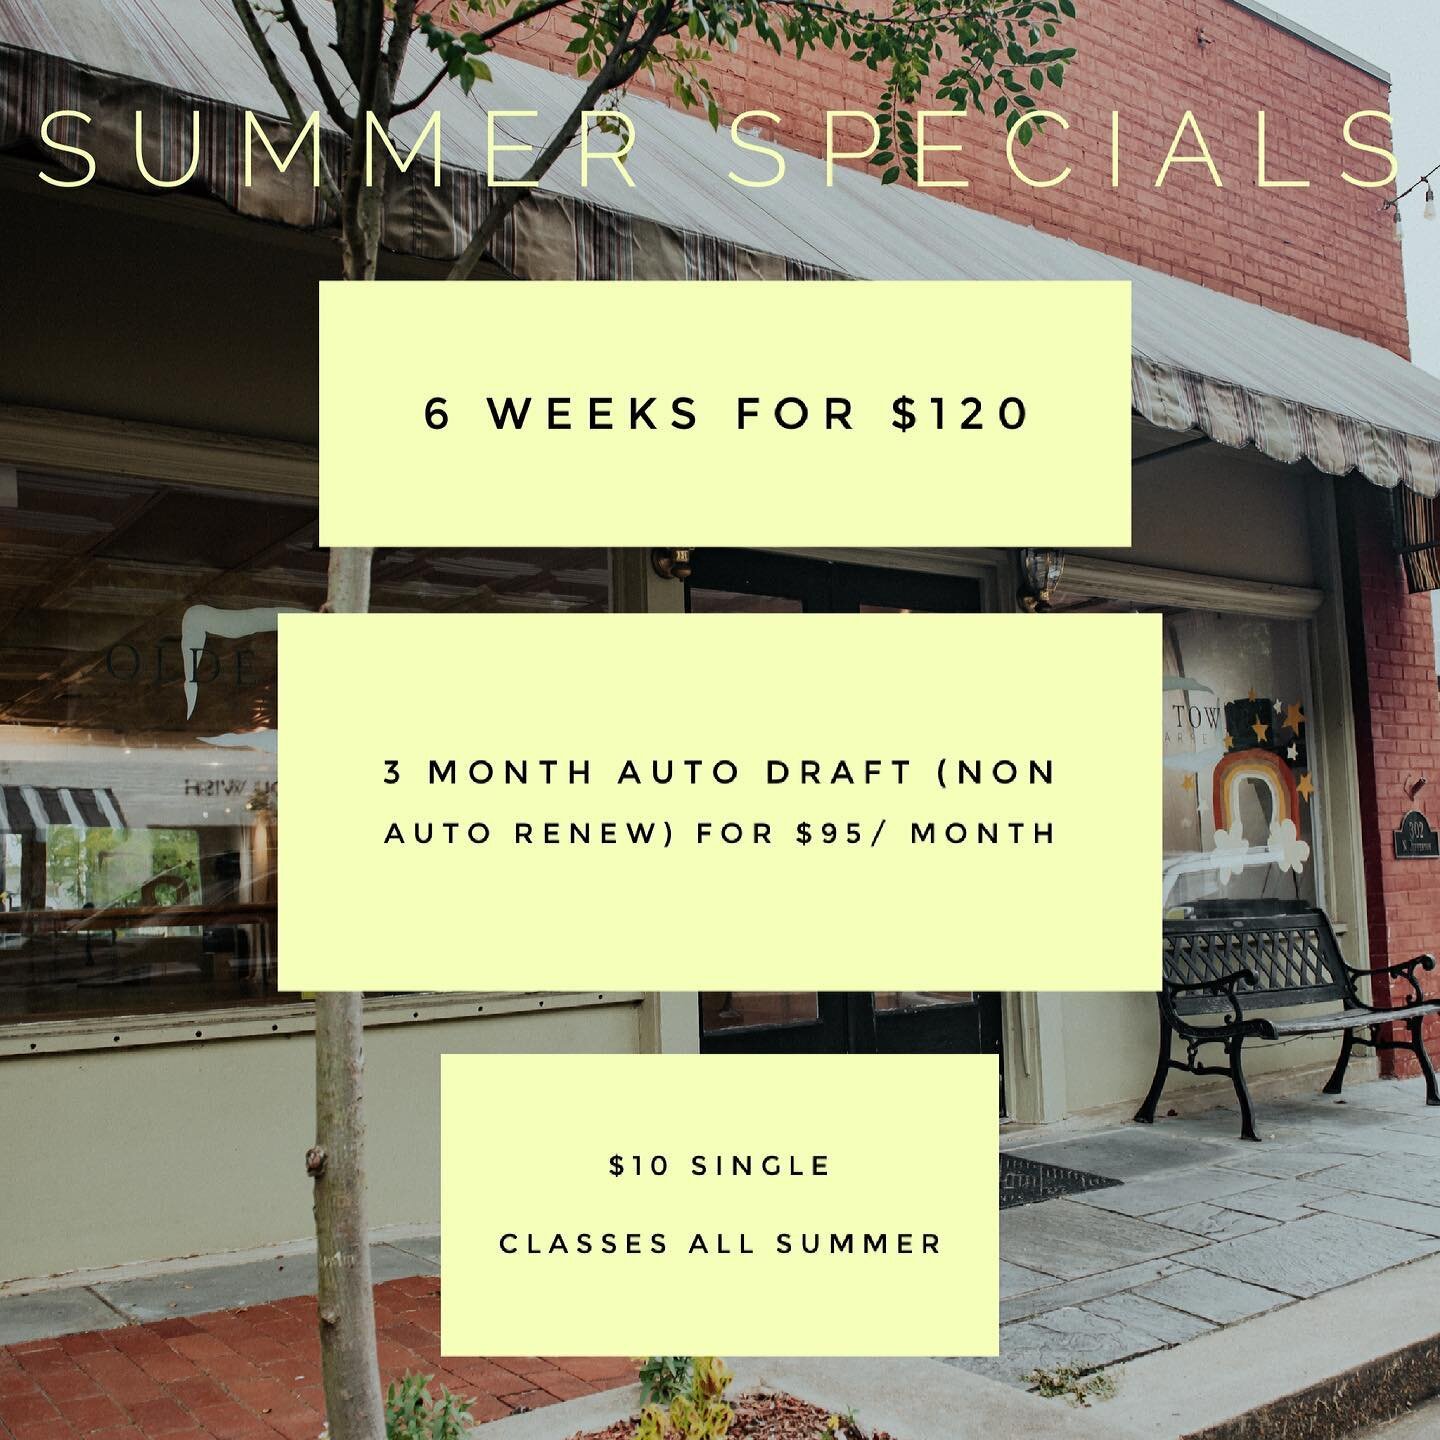 ⁣
⭐️ SUMMER SPECIALS ⭐️⁣
.⁣
6 weeks for $120 
⁣
3 month auto draft (non-autorenew) $95/month⁣
⁣
$10 single classes all summer !!!!!!⁣
.⁣
Available on MINDBODY NOW! Purchase online or in studio! ⁣
.⁣
.⁣
.⁣
#oldetownebarre #otbfitness #otbbarre #otbcli